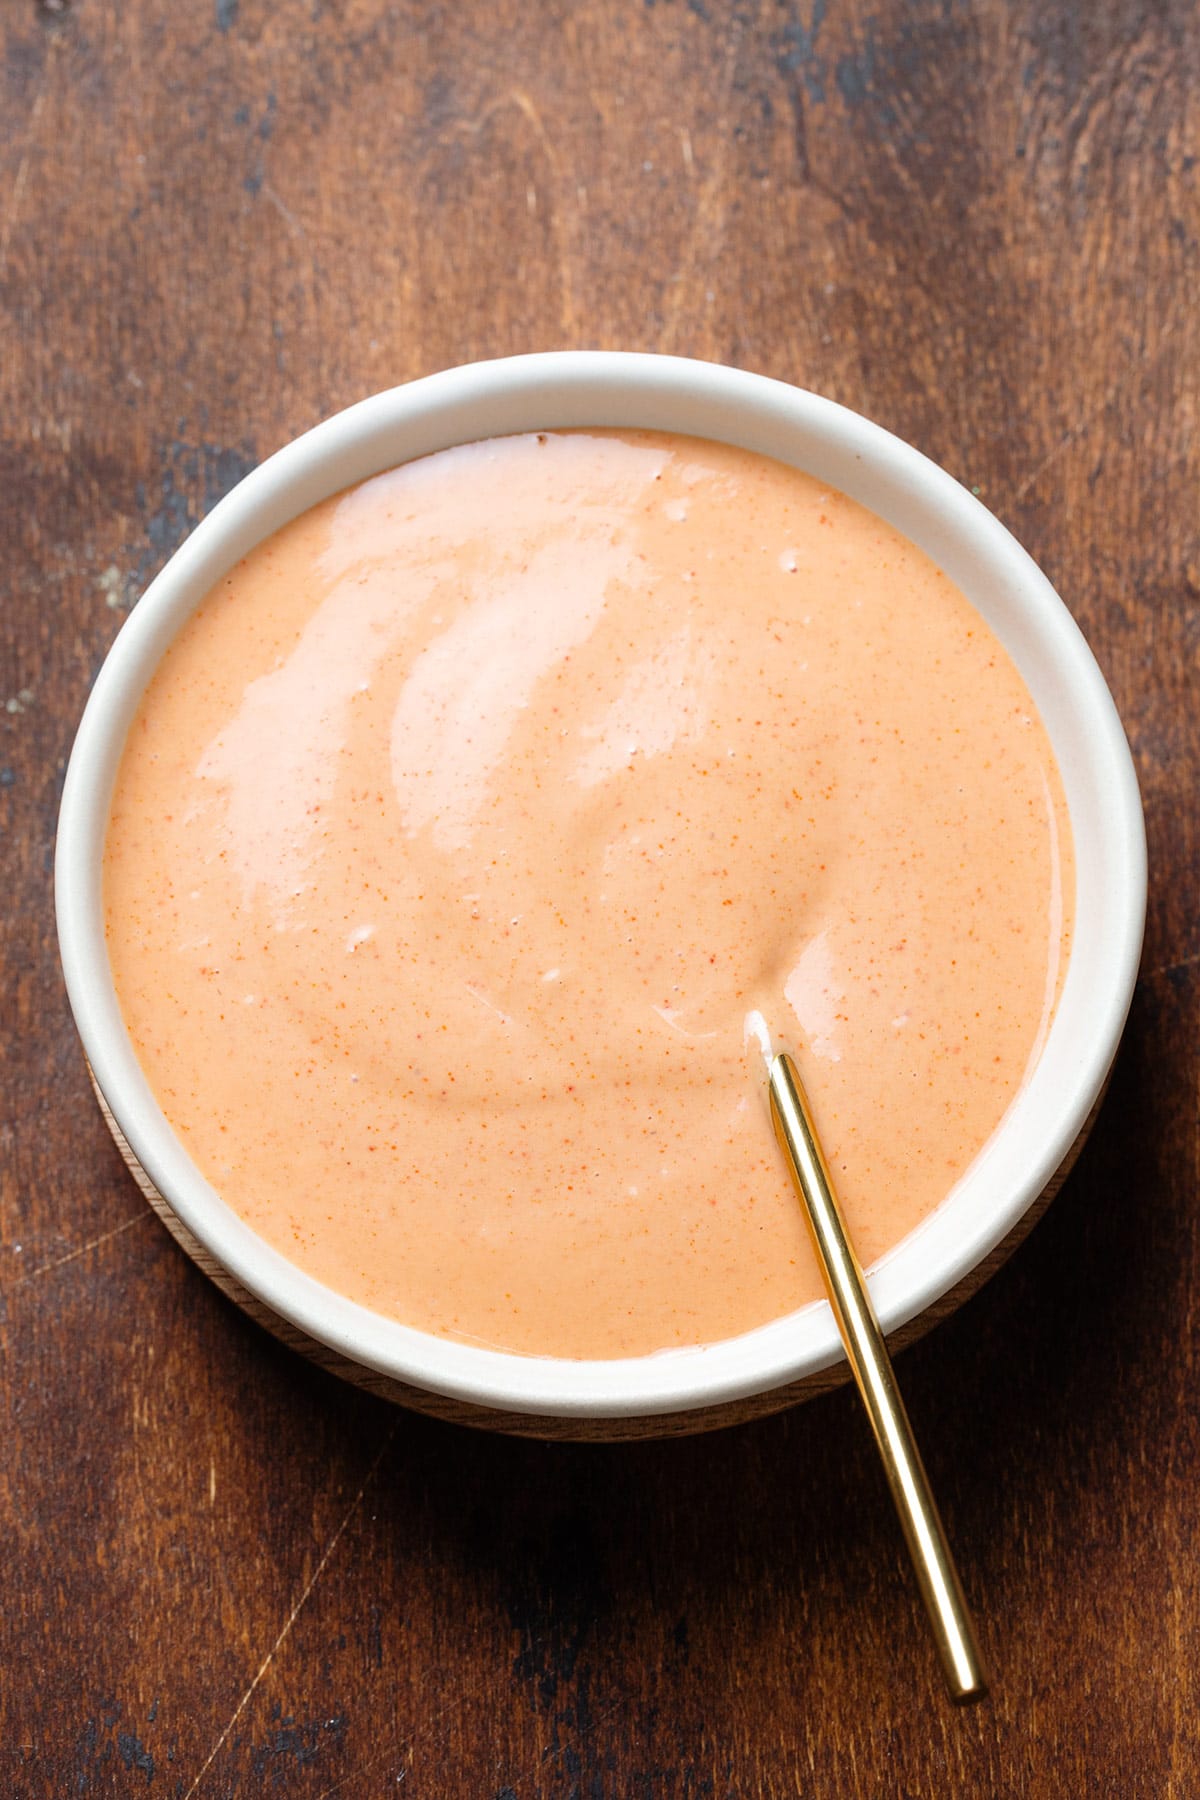 Creamy orange-colored house sauce in white bowl with a gold spoon on a dark wooden background.